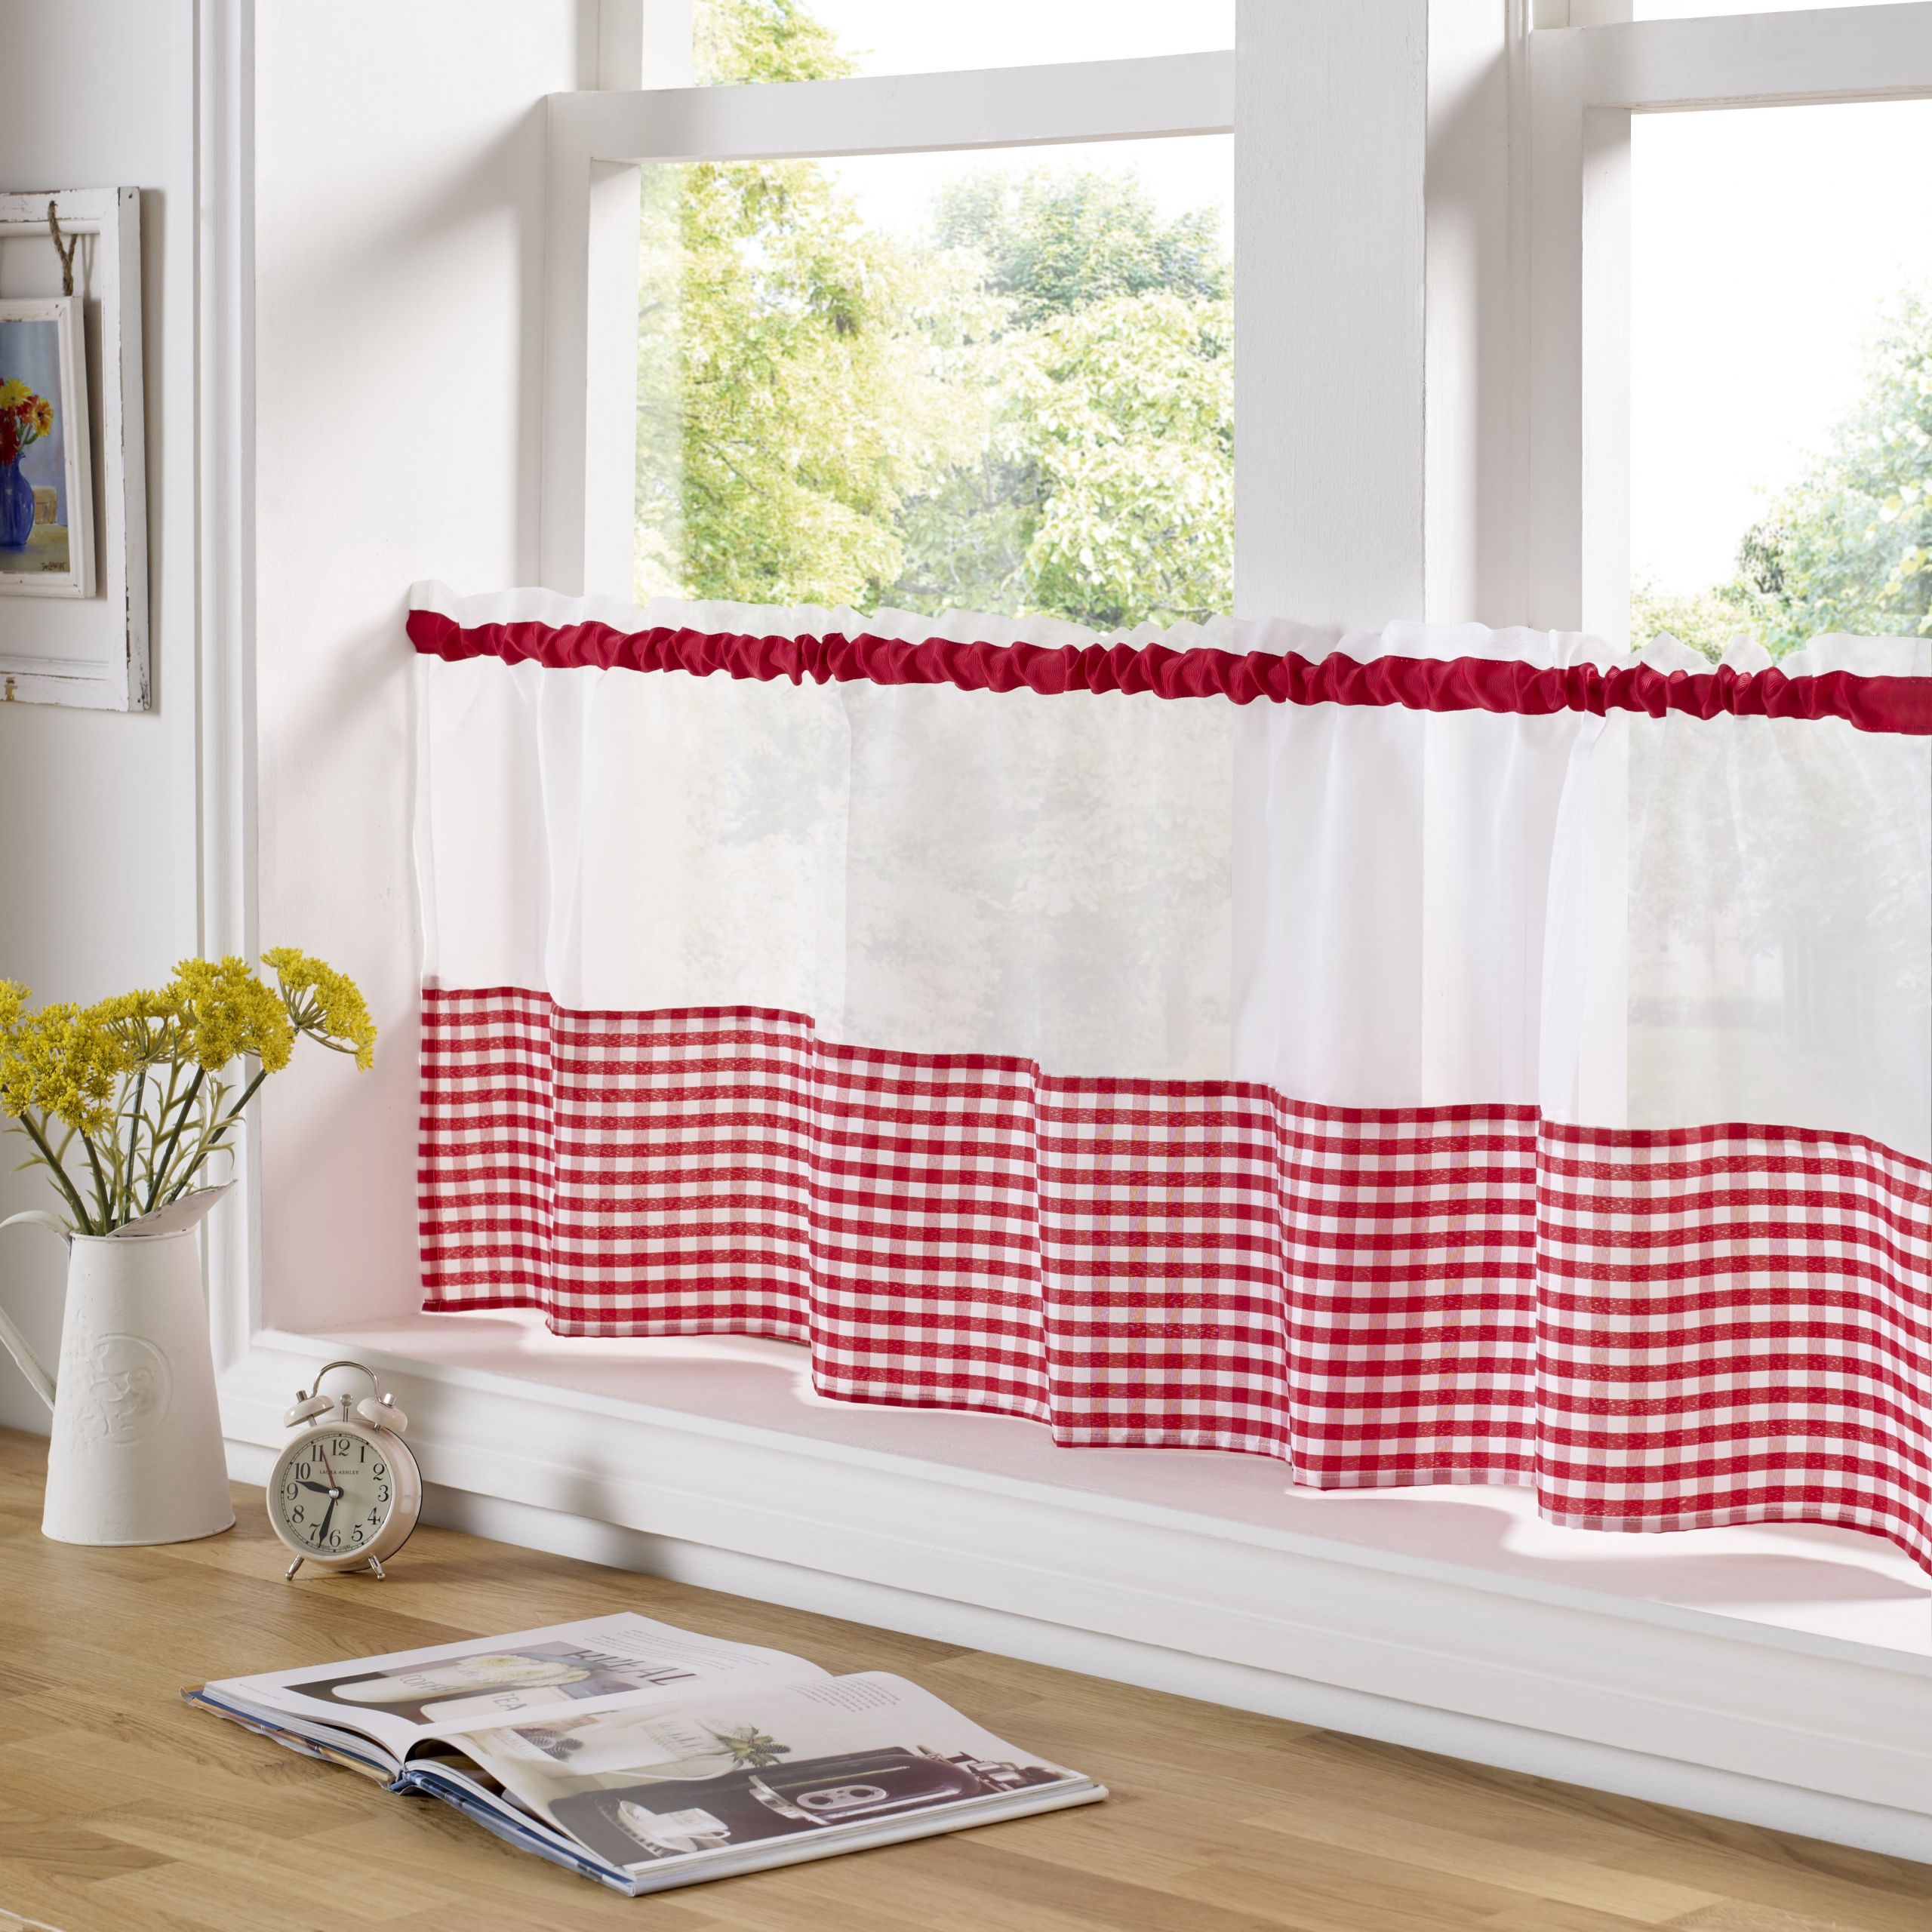 Kitchen Cafe Curtains
 Ready made Red Gingham Voile Café Curtain from Net